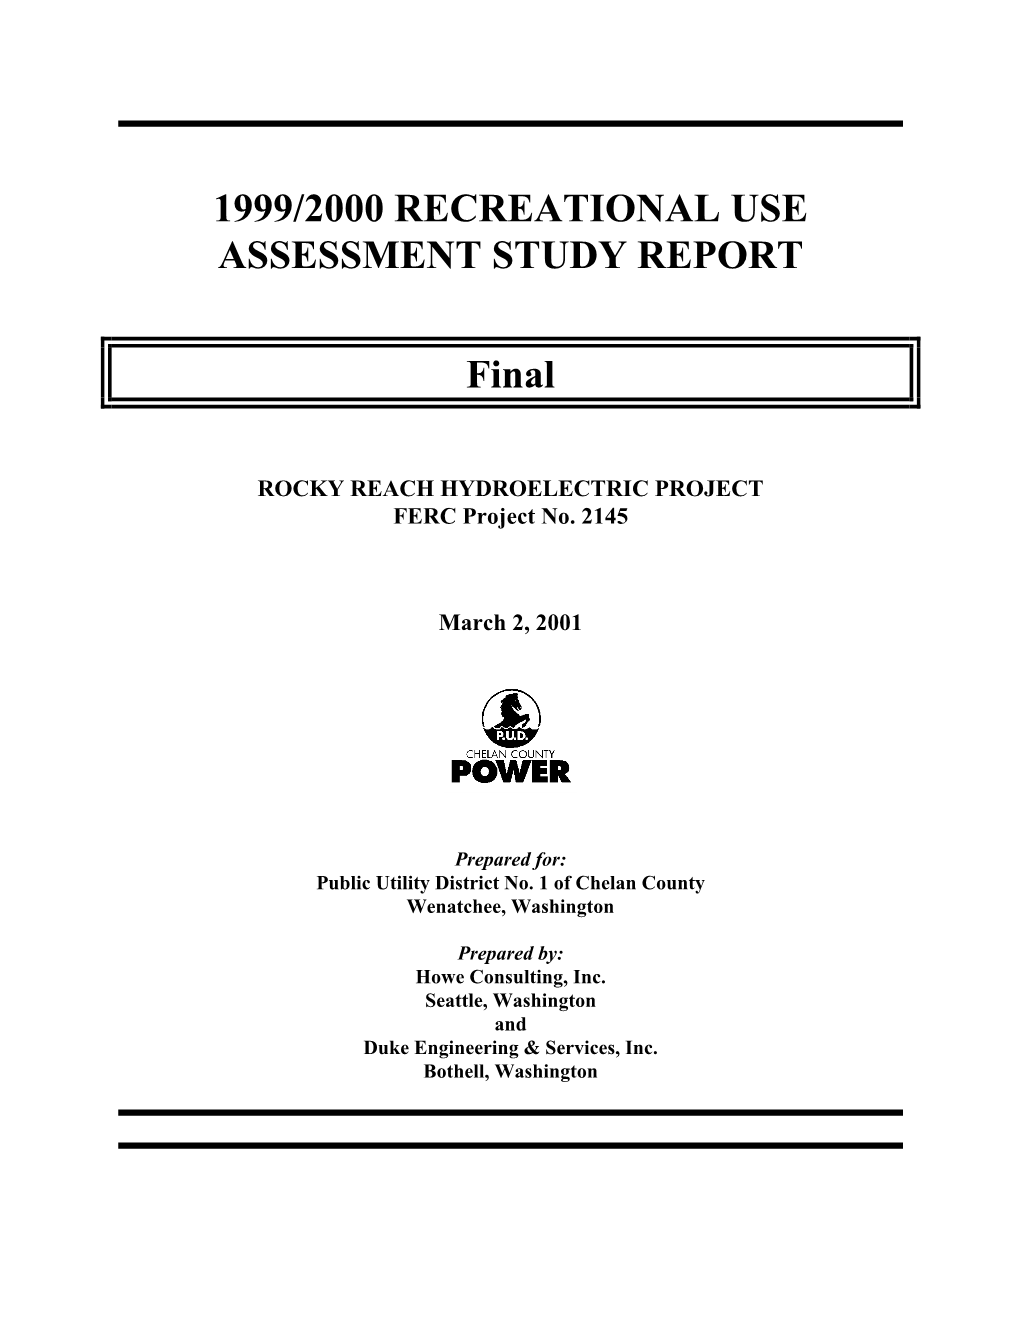 Final Study Report, March 2, 2001